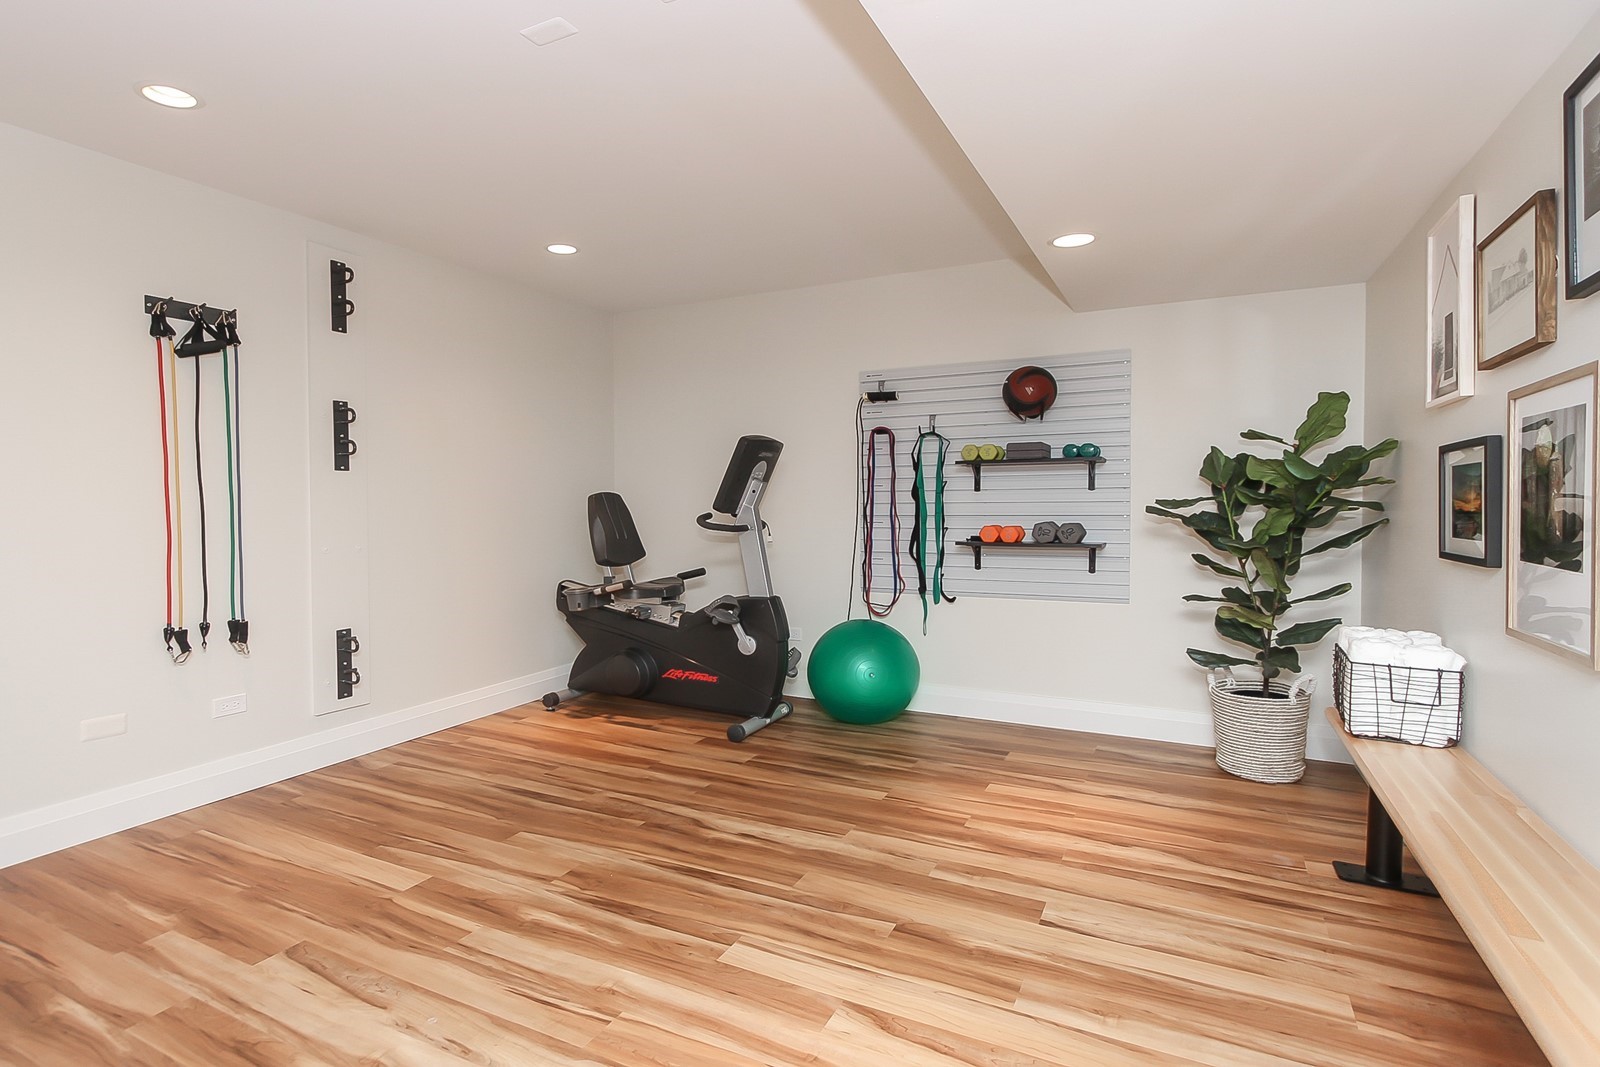 Basement Workout Area With Built-In Wood Bench and Equipment Storage